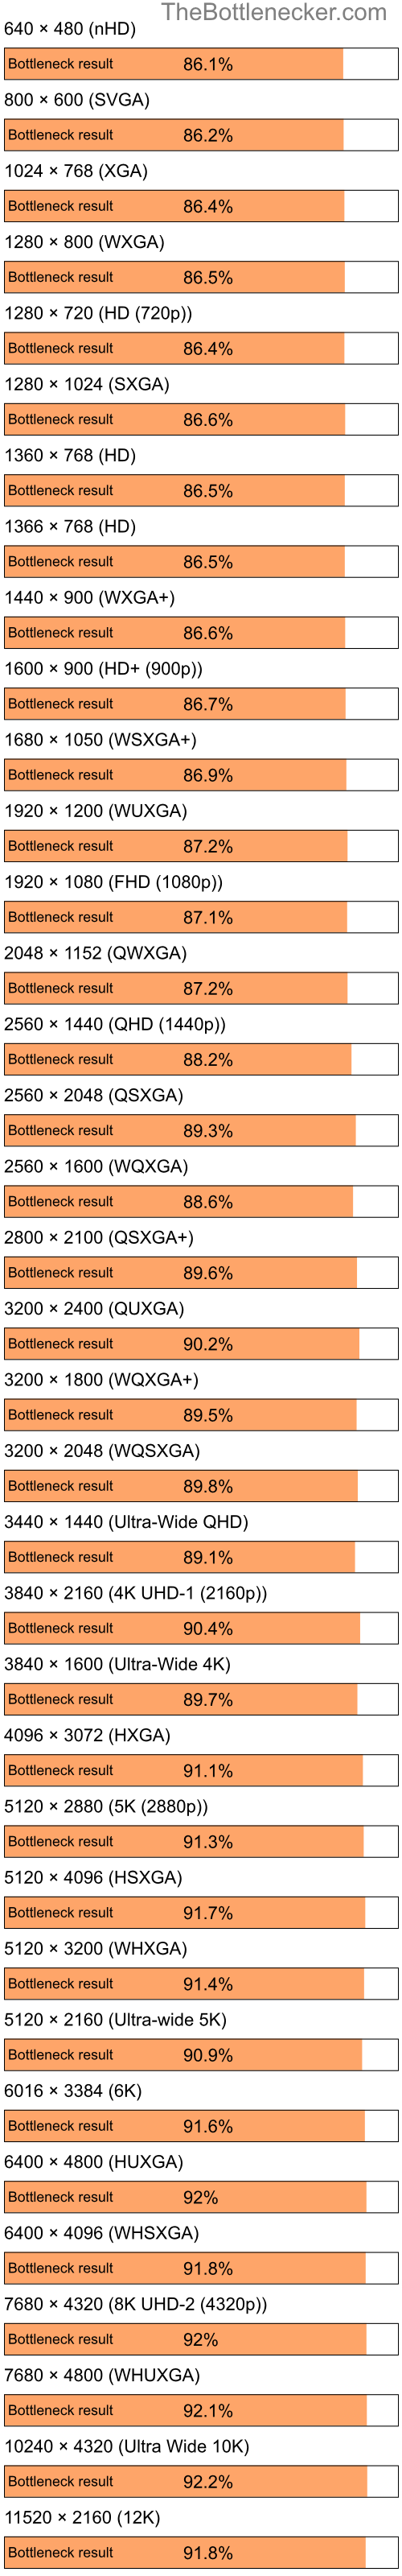 Bottleneck results by resolution for Intel Celeron M 420 and NVIDIA GeForce4 Ti 4200 in Processor Intense Tasks